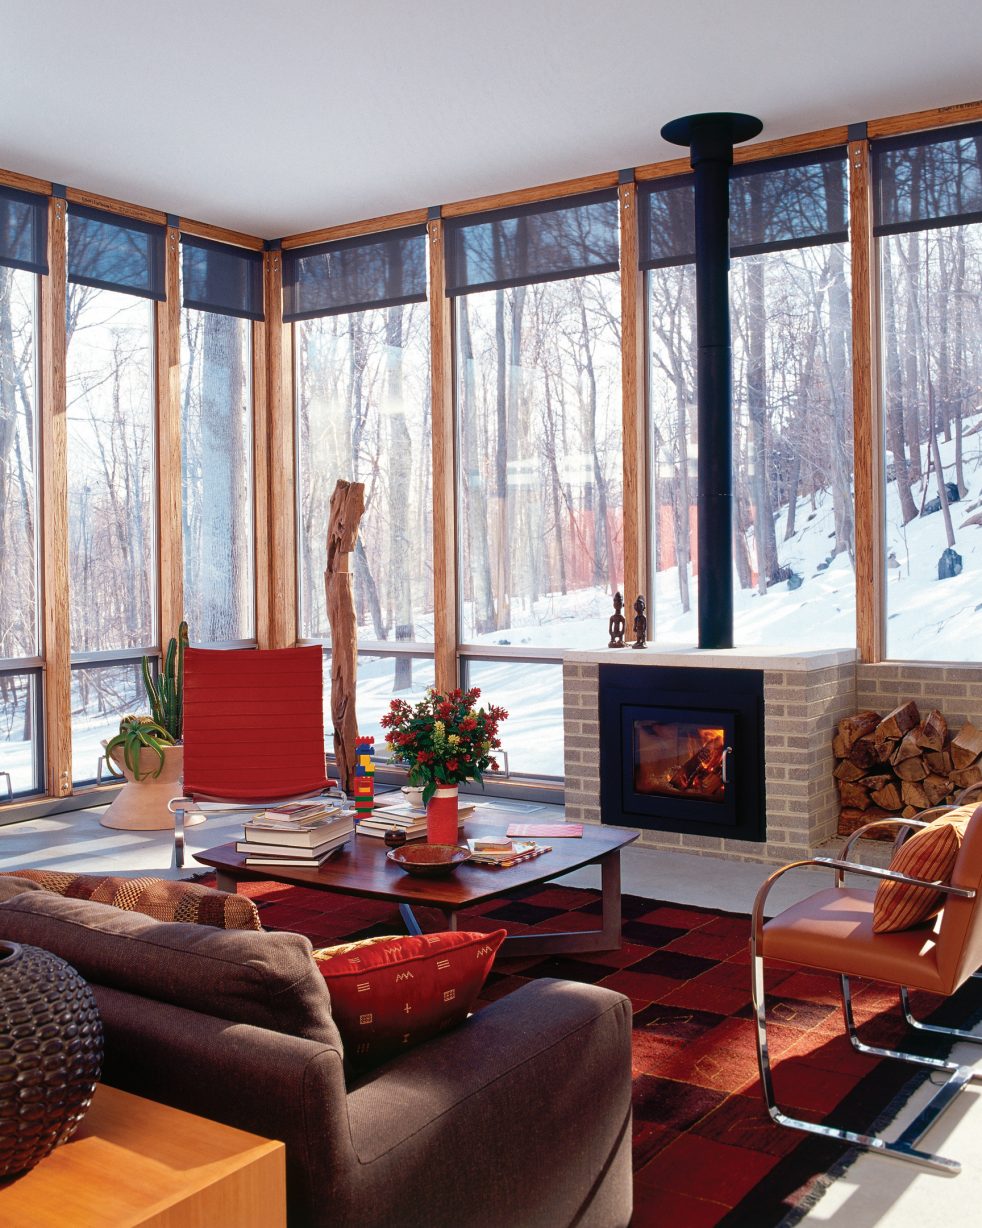 open living space with fireplace surrounded by windows and views of a snowy forest